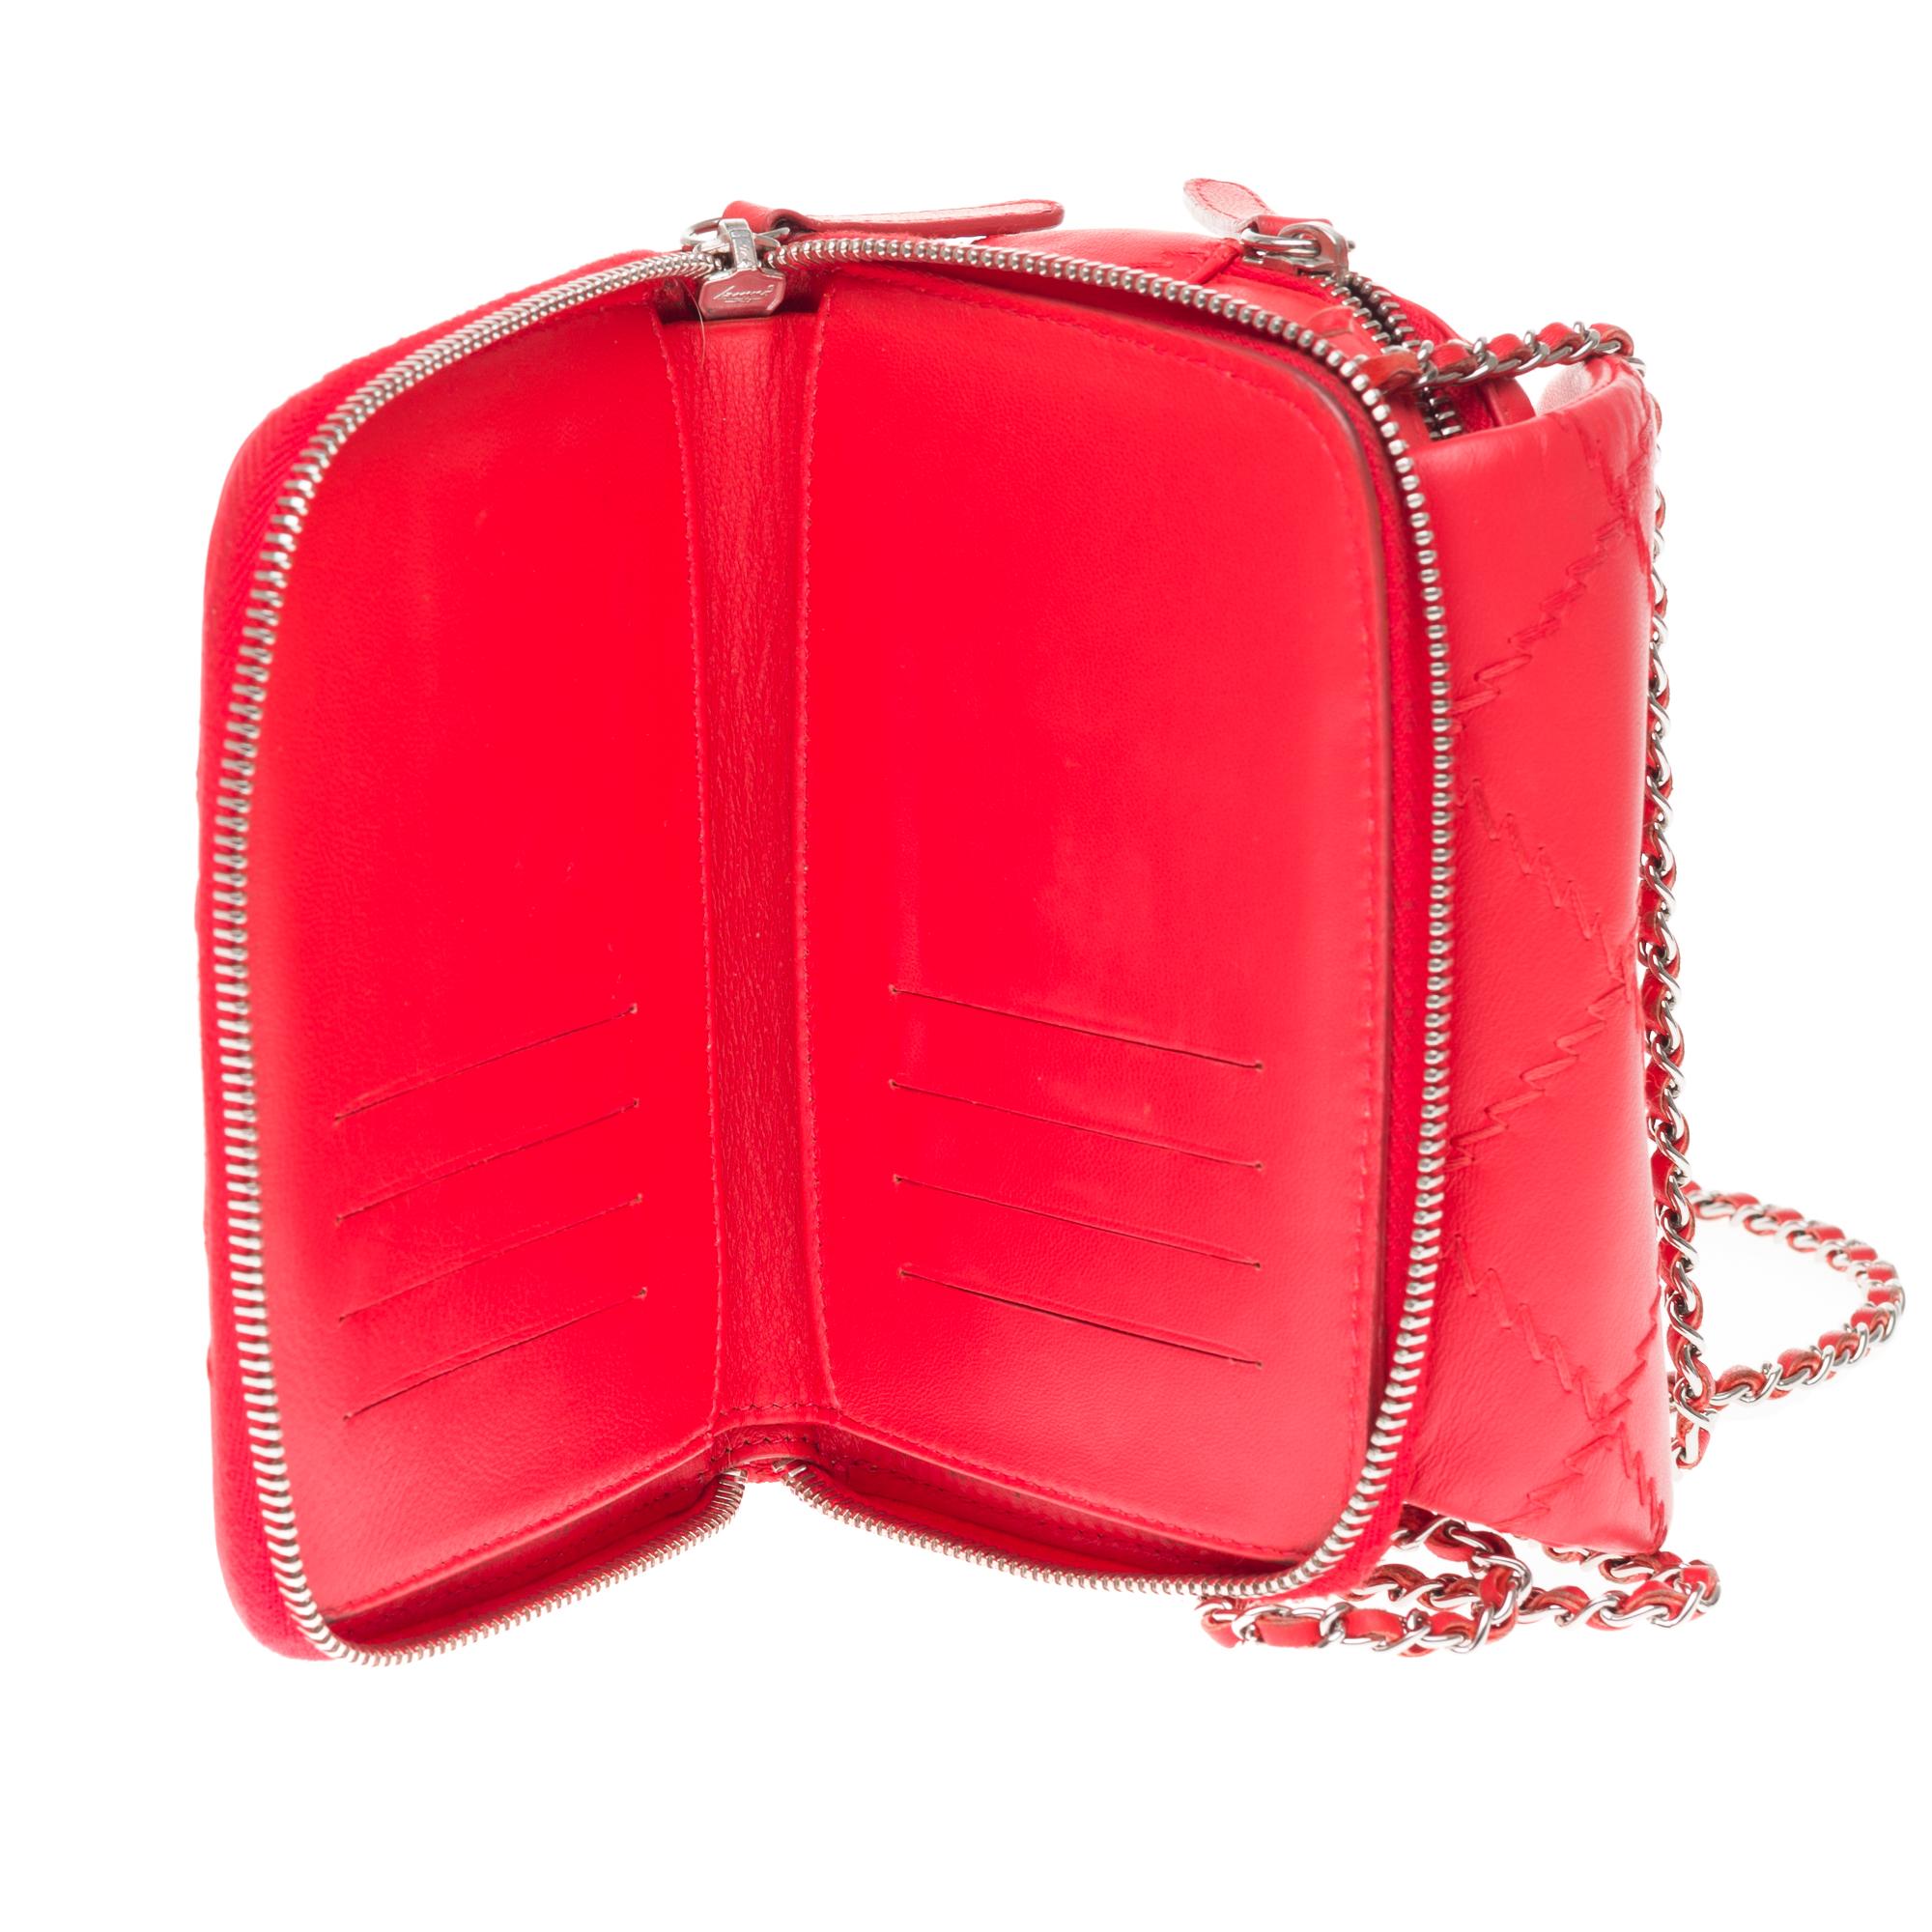 Amazing chanel Purse/Wallet in red leather and silver hardware 2